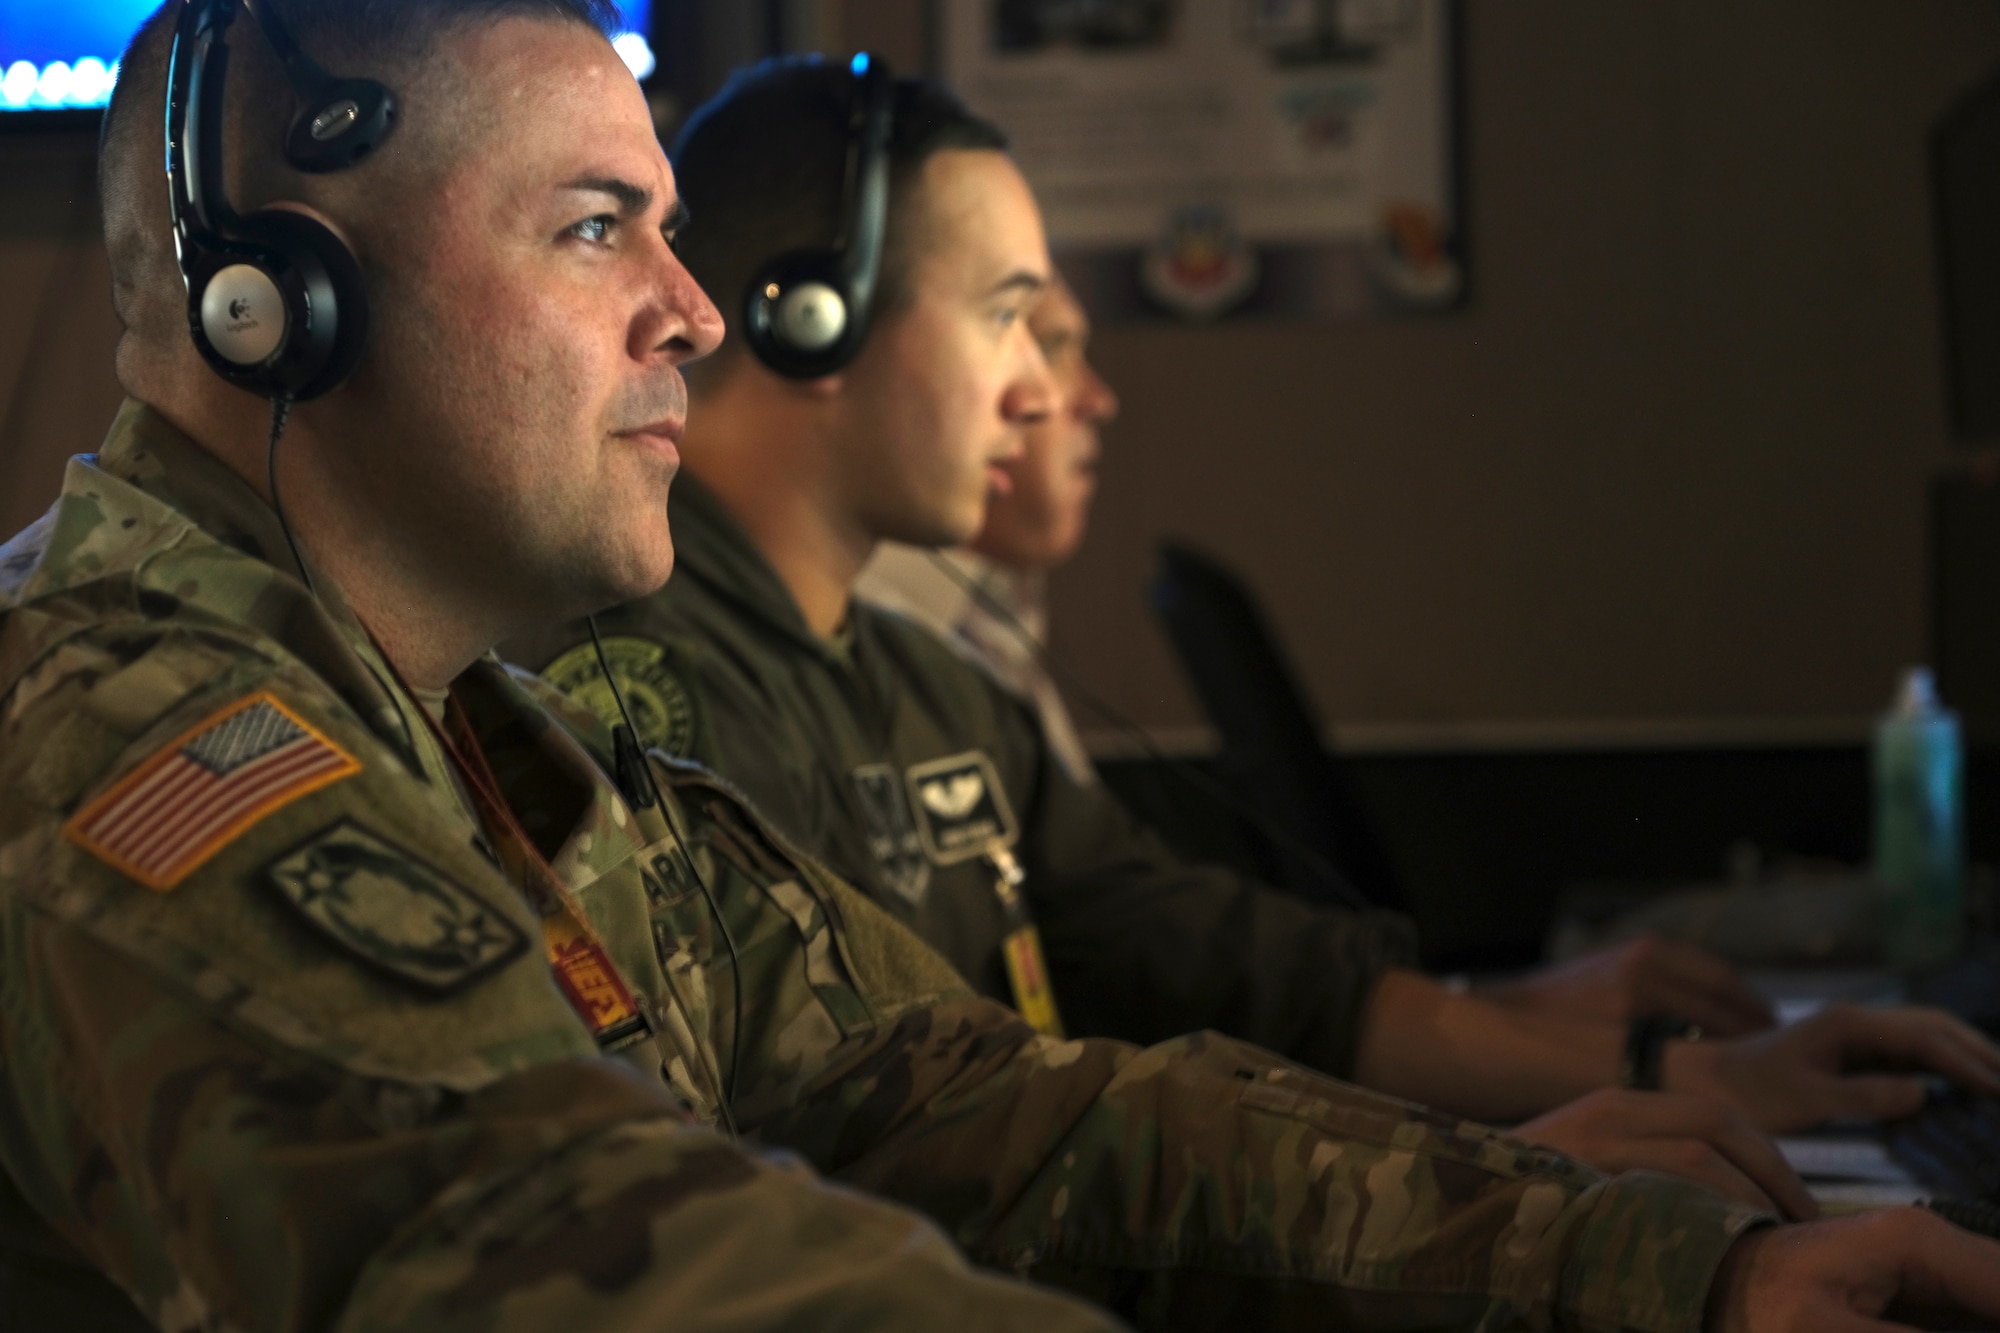 Hosted by the 705th Combat Training Squadron at Kirtland AFB, NM, members of the US Army refine their skills  during exercise Virtual Flag 20-1.